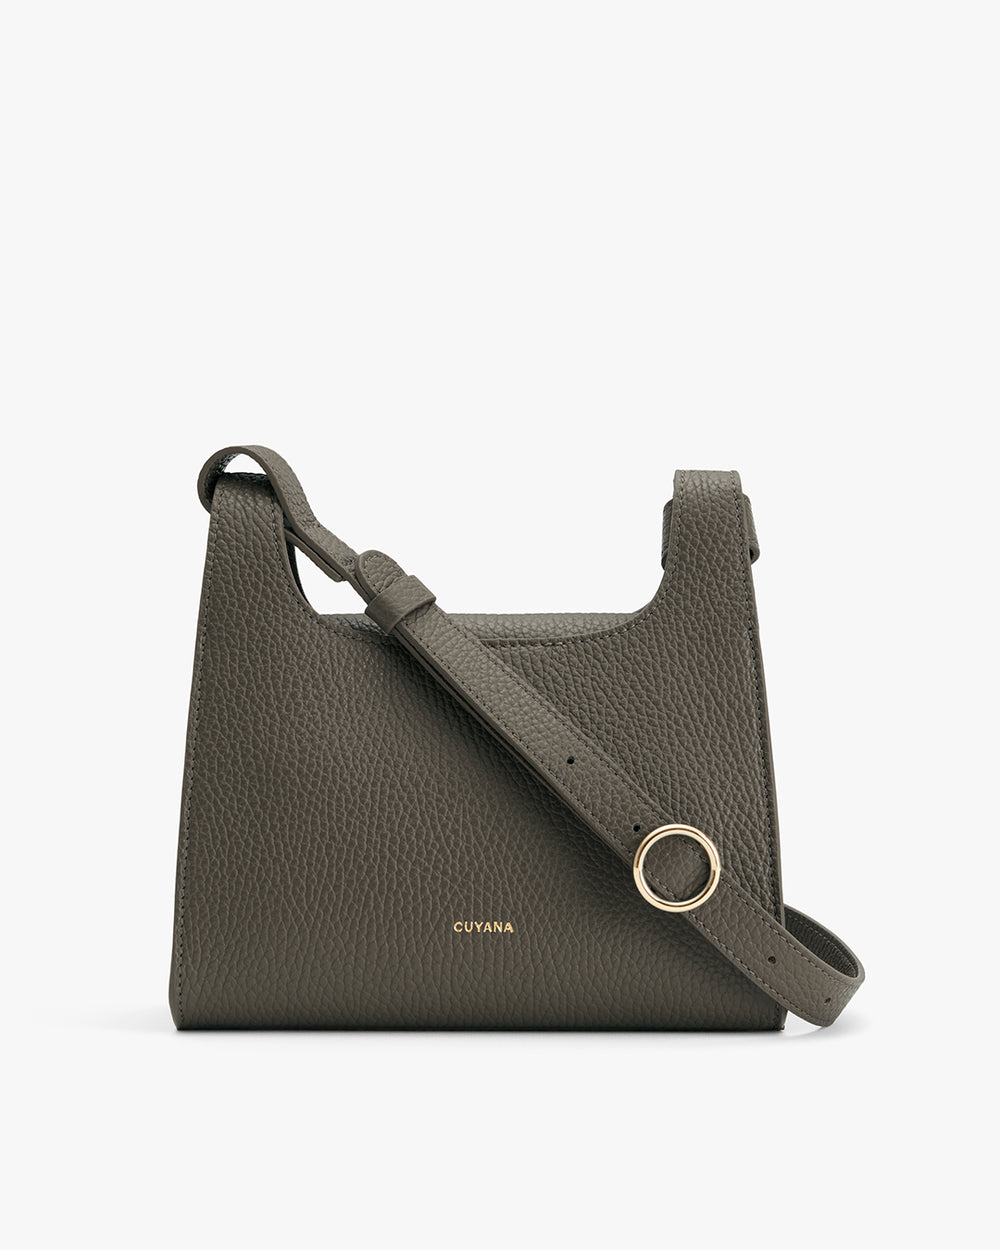 Handbag with a long strap and round metal detail